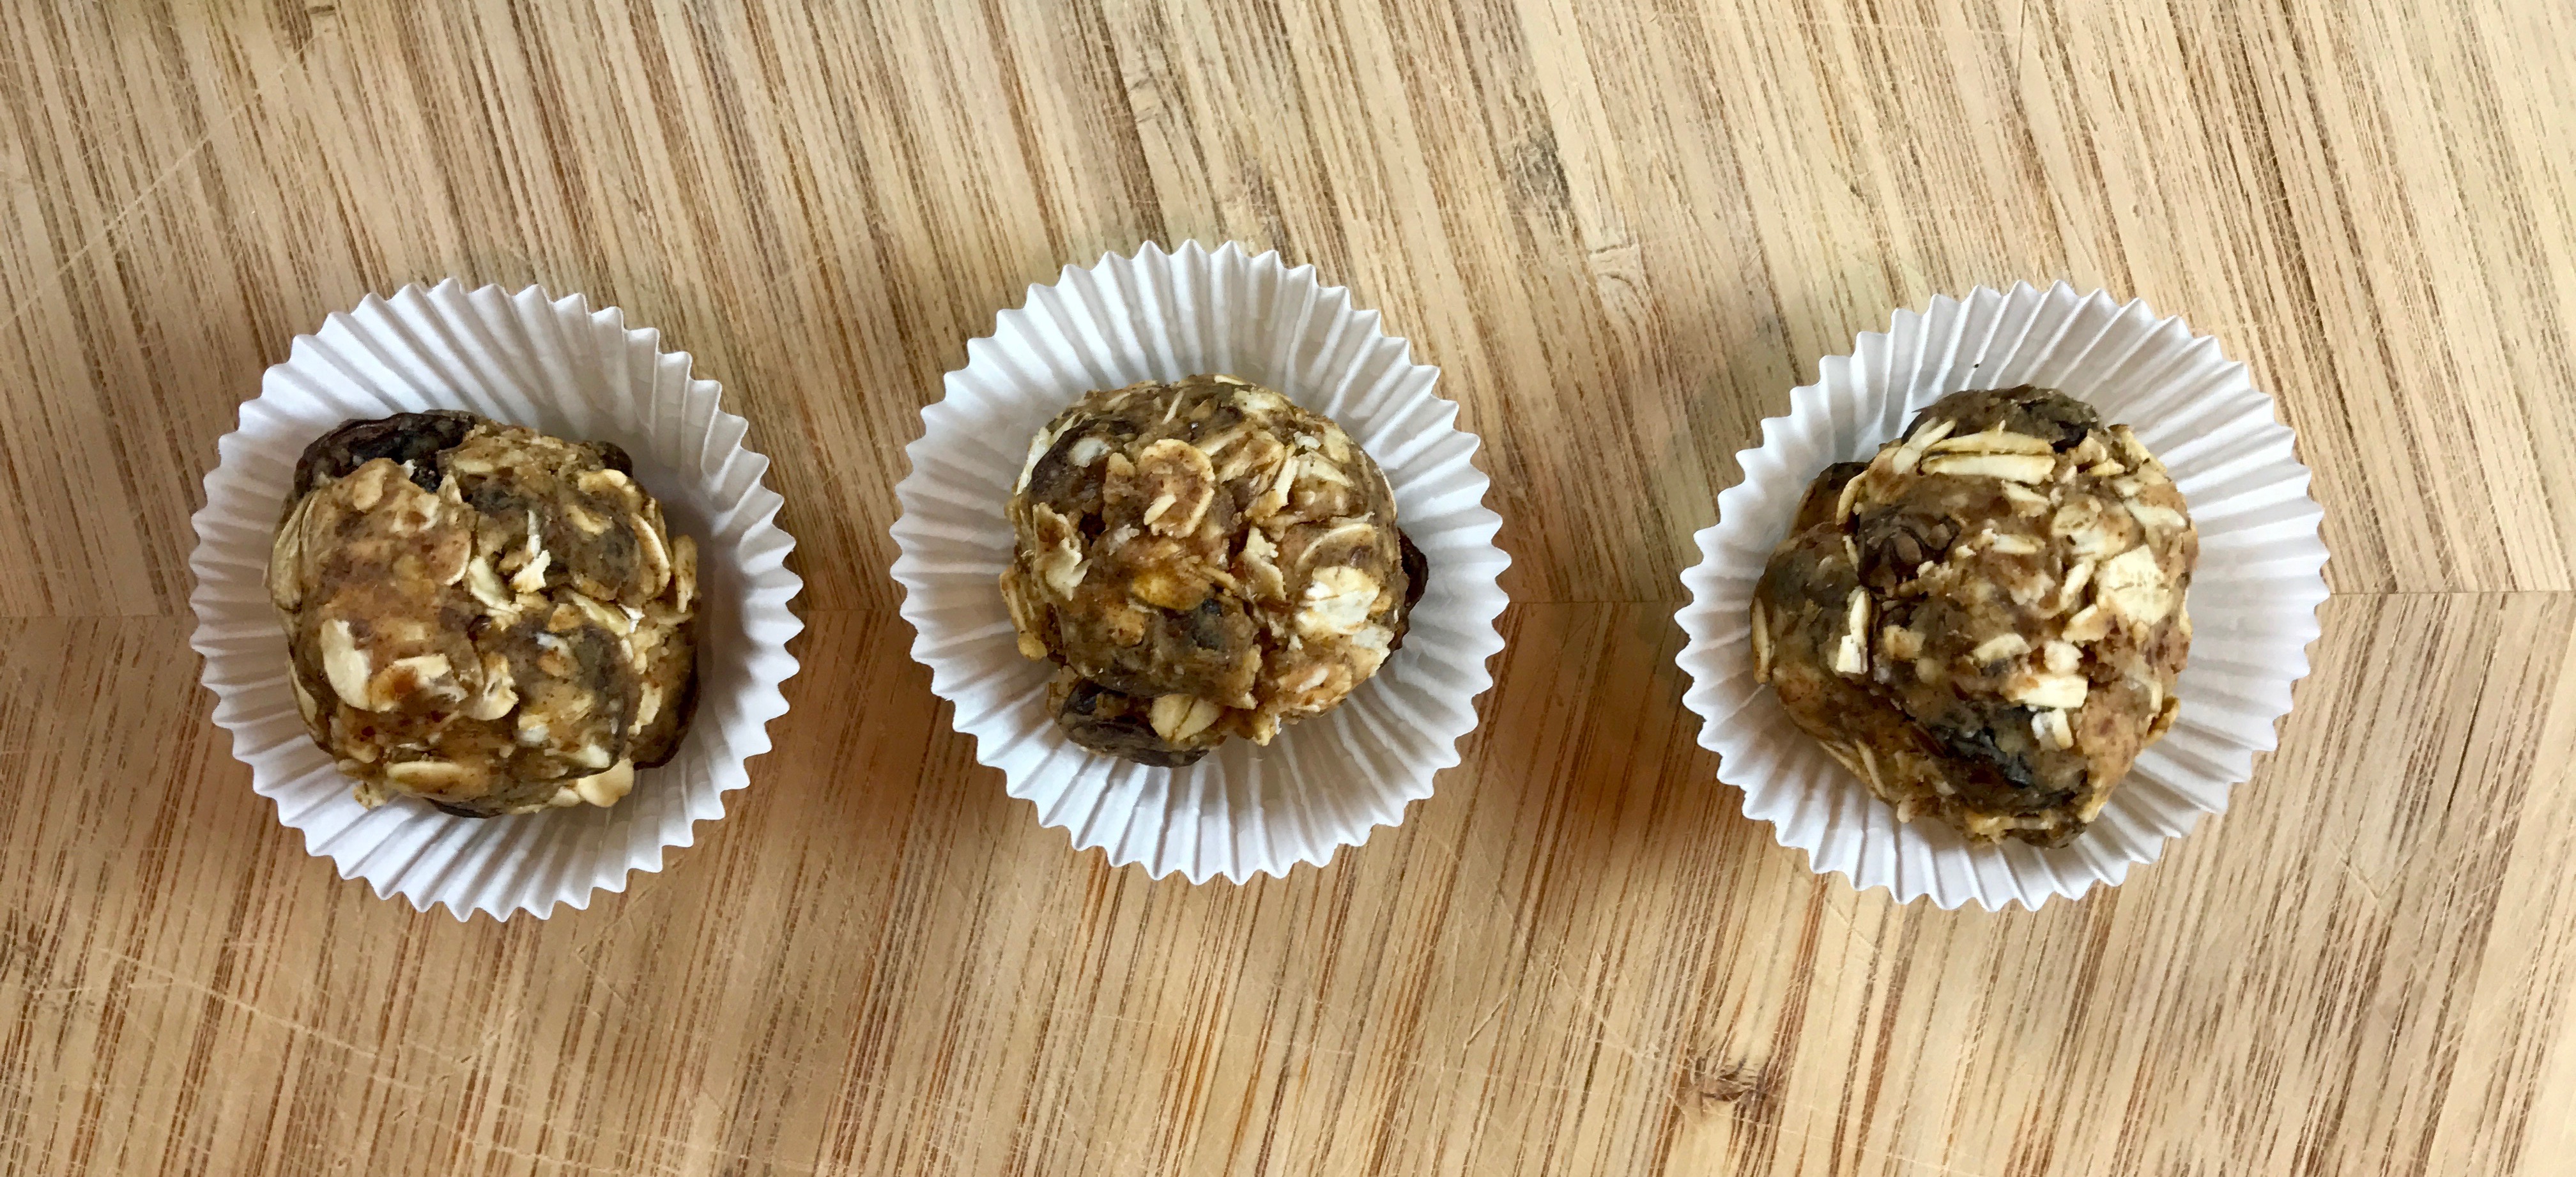 Almond Butter, Oatmeal, and Raisin Bites